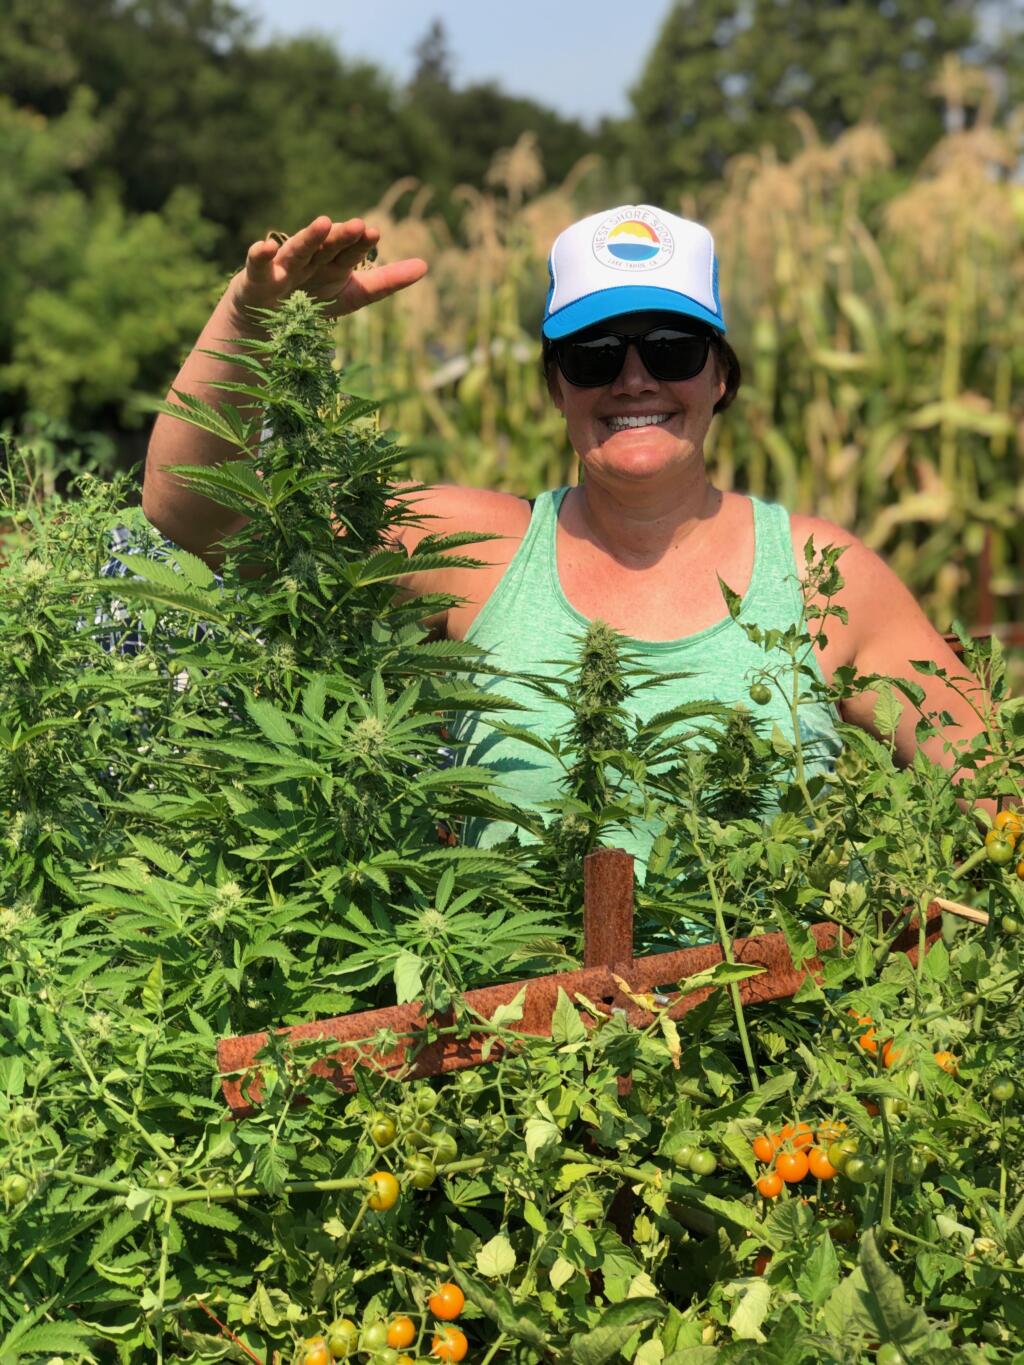 Erin Gore, founder and CEO, Garden Society in Cloverdale, shows how high a cannabis plant is growing. Her business is on track to grow too with a capital investment. Photo courtesy of Garden Society